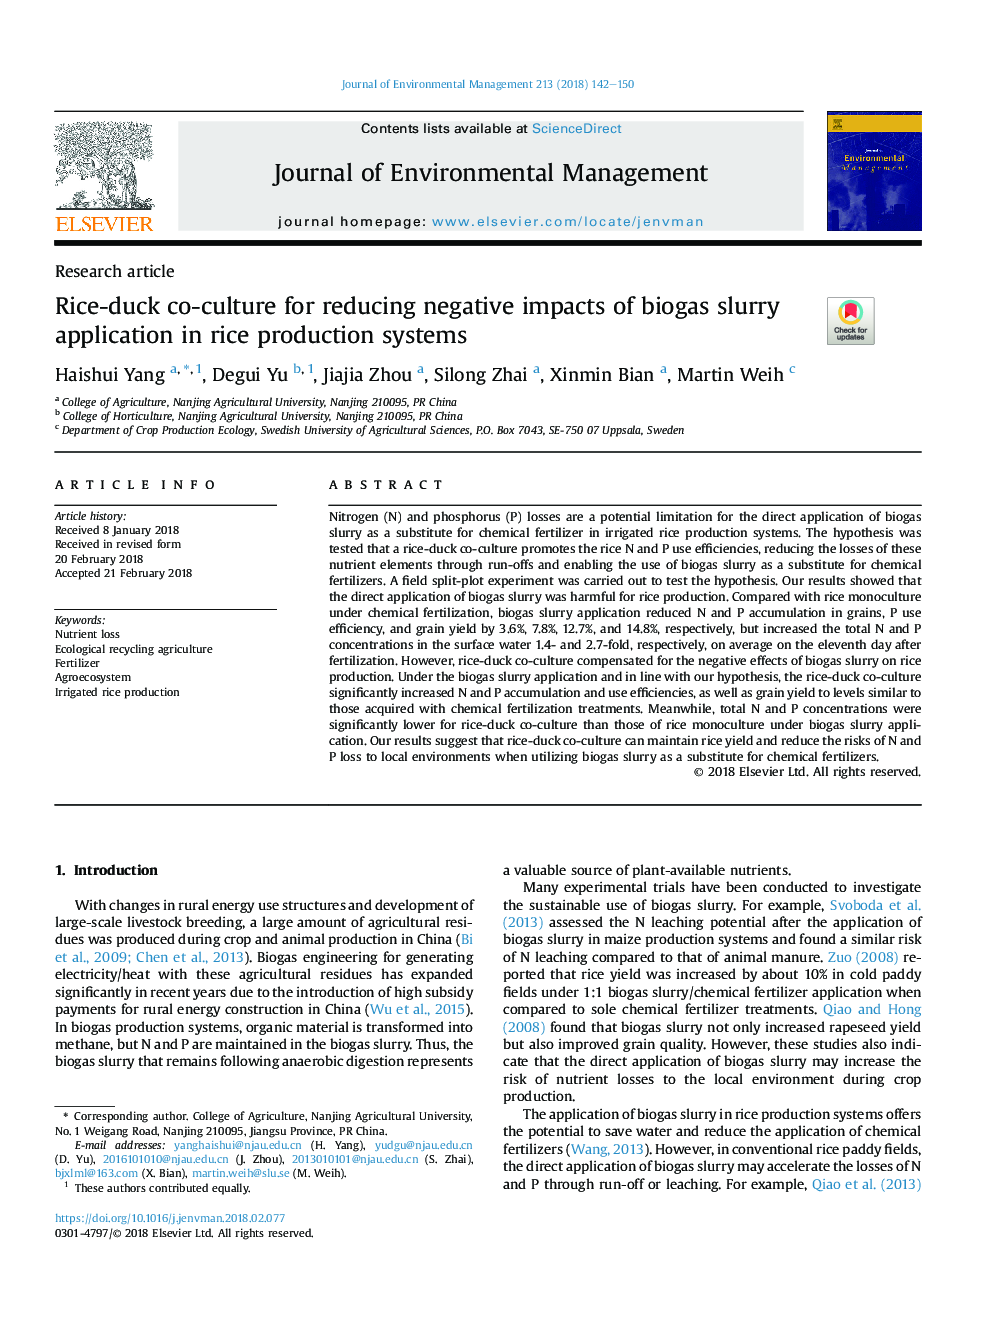 Rice-duck co-culture for reducing negative impacts of biogas slurry application in rice production systems